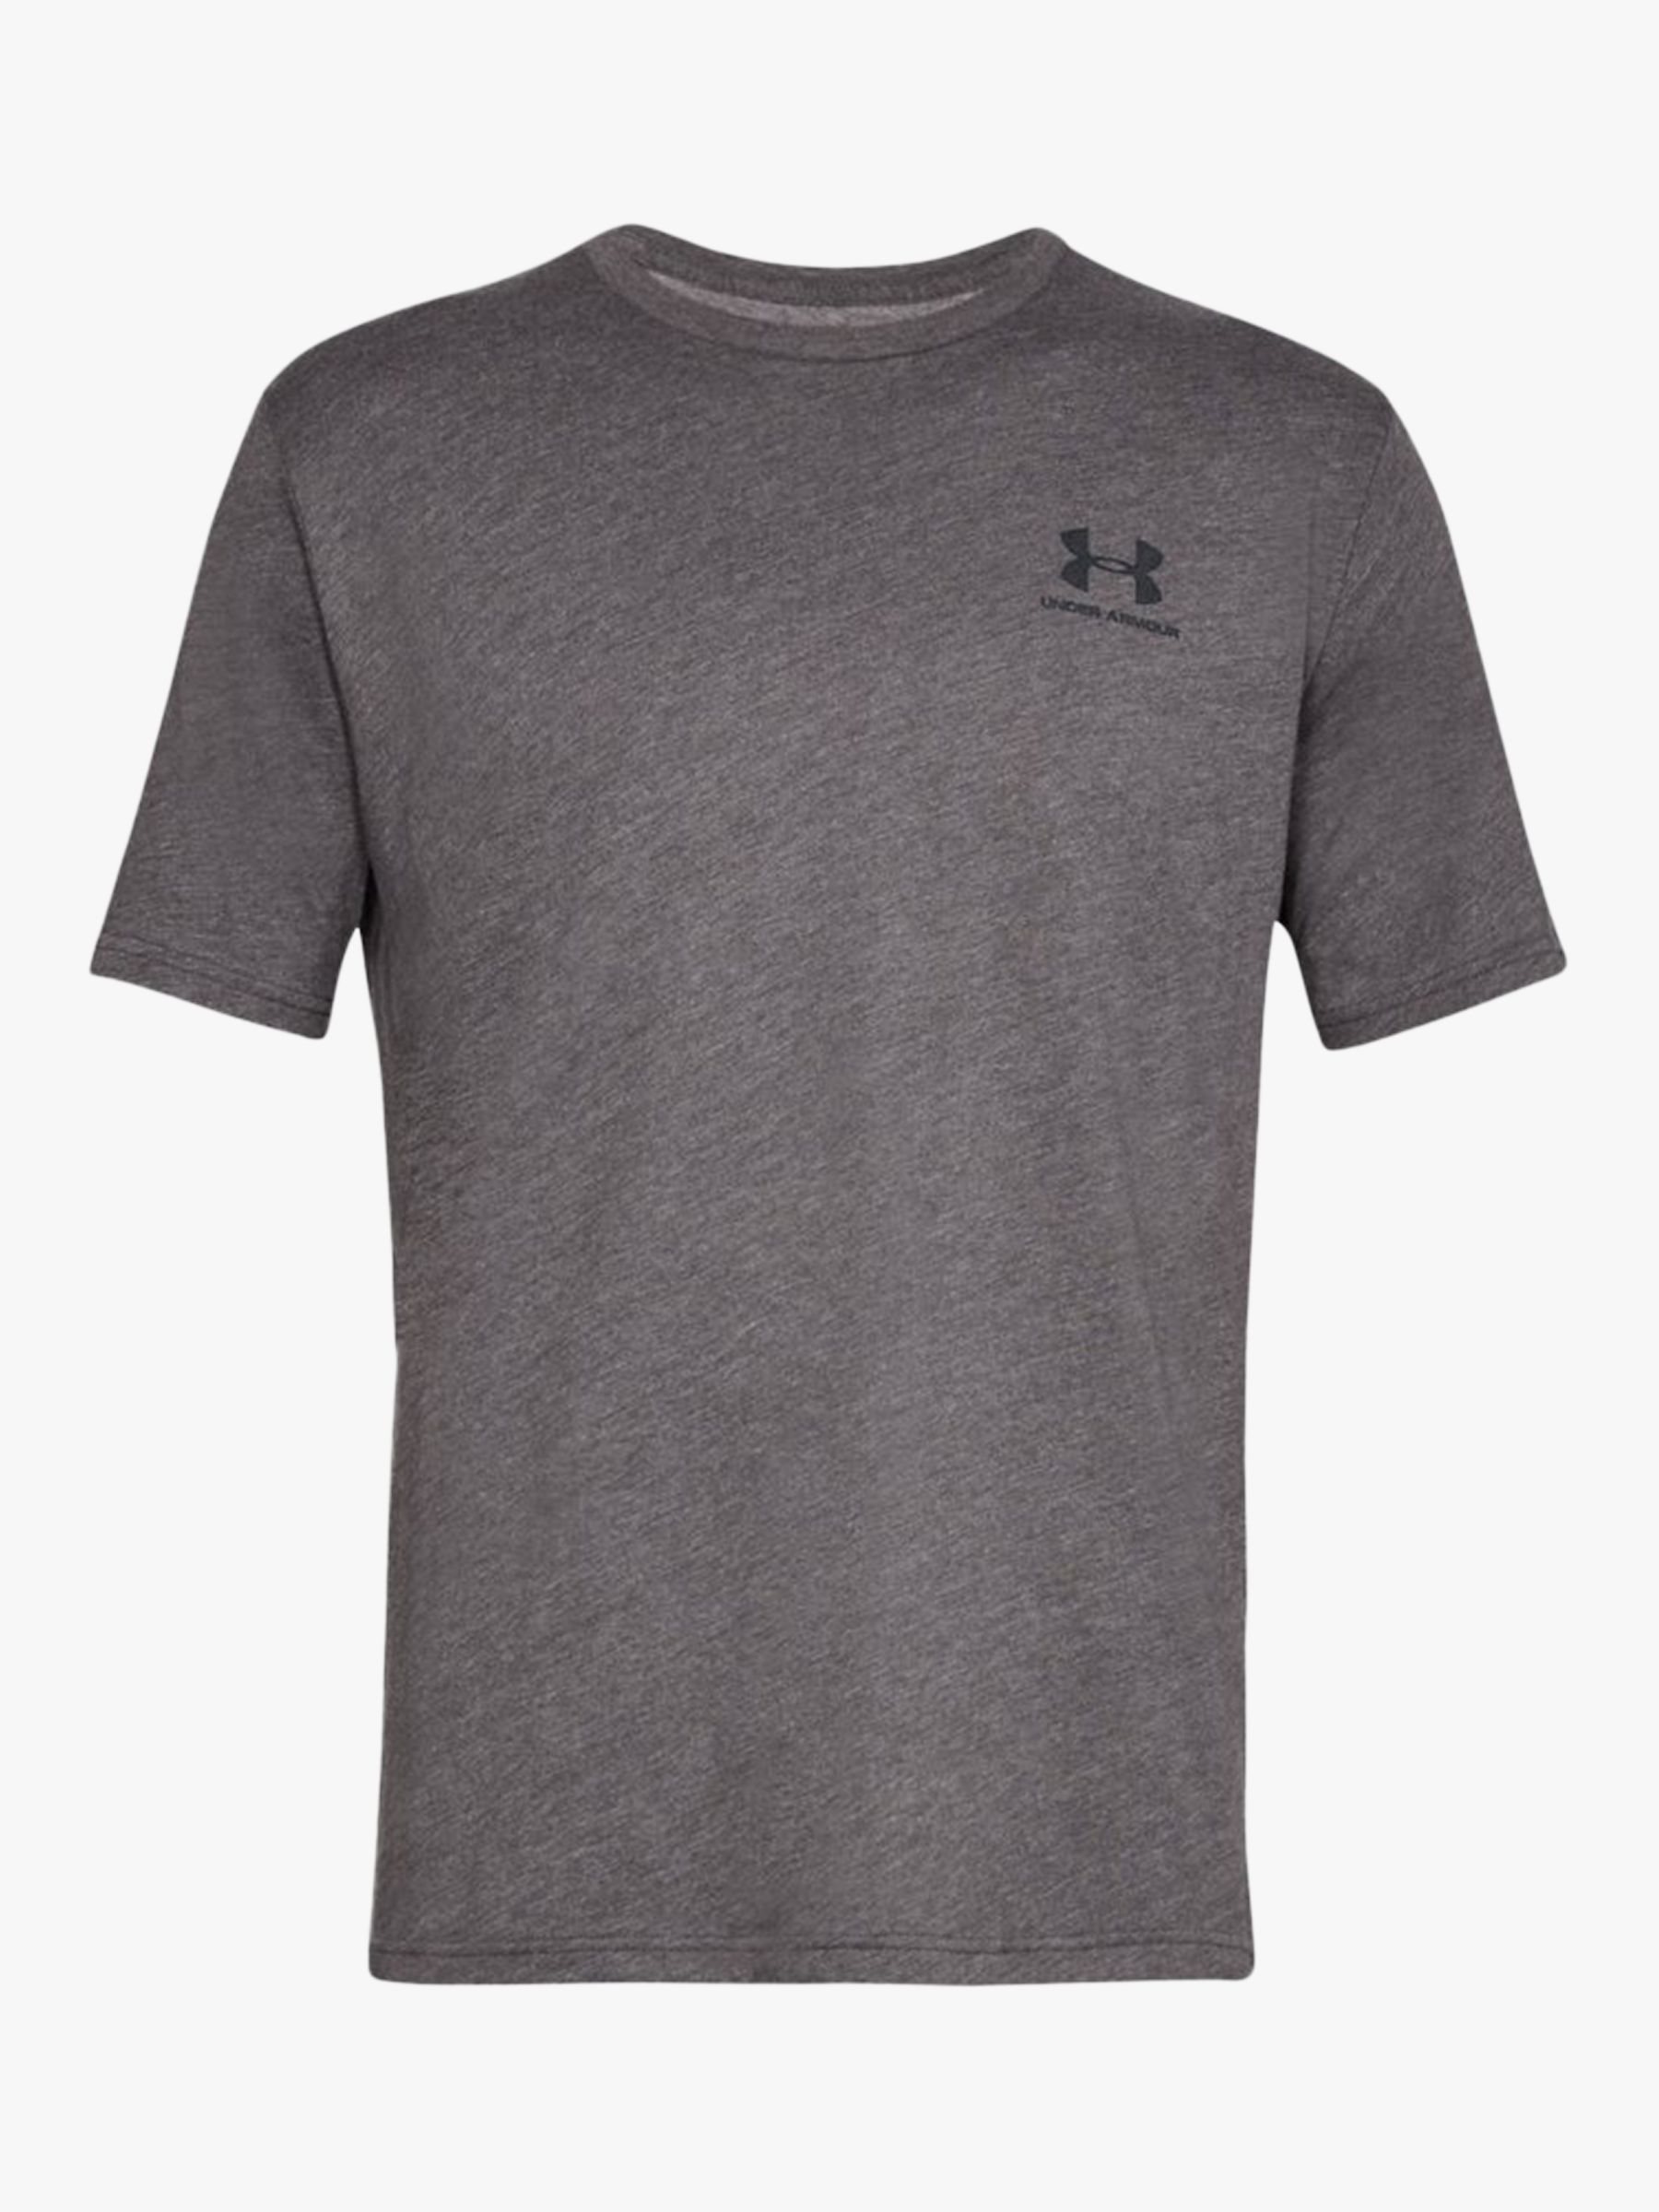 Under Armour Charged Cotton Short Sleeve Training Top, Charcoal Medium Heather/Black, S